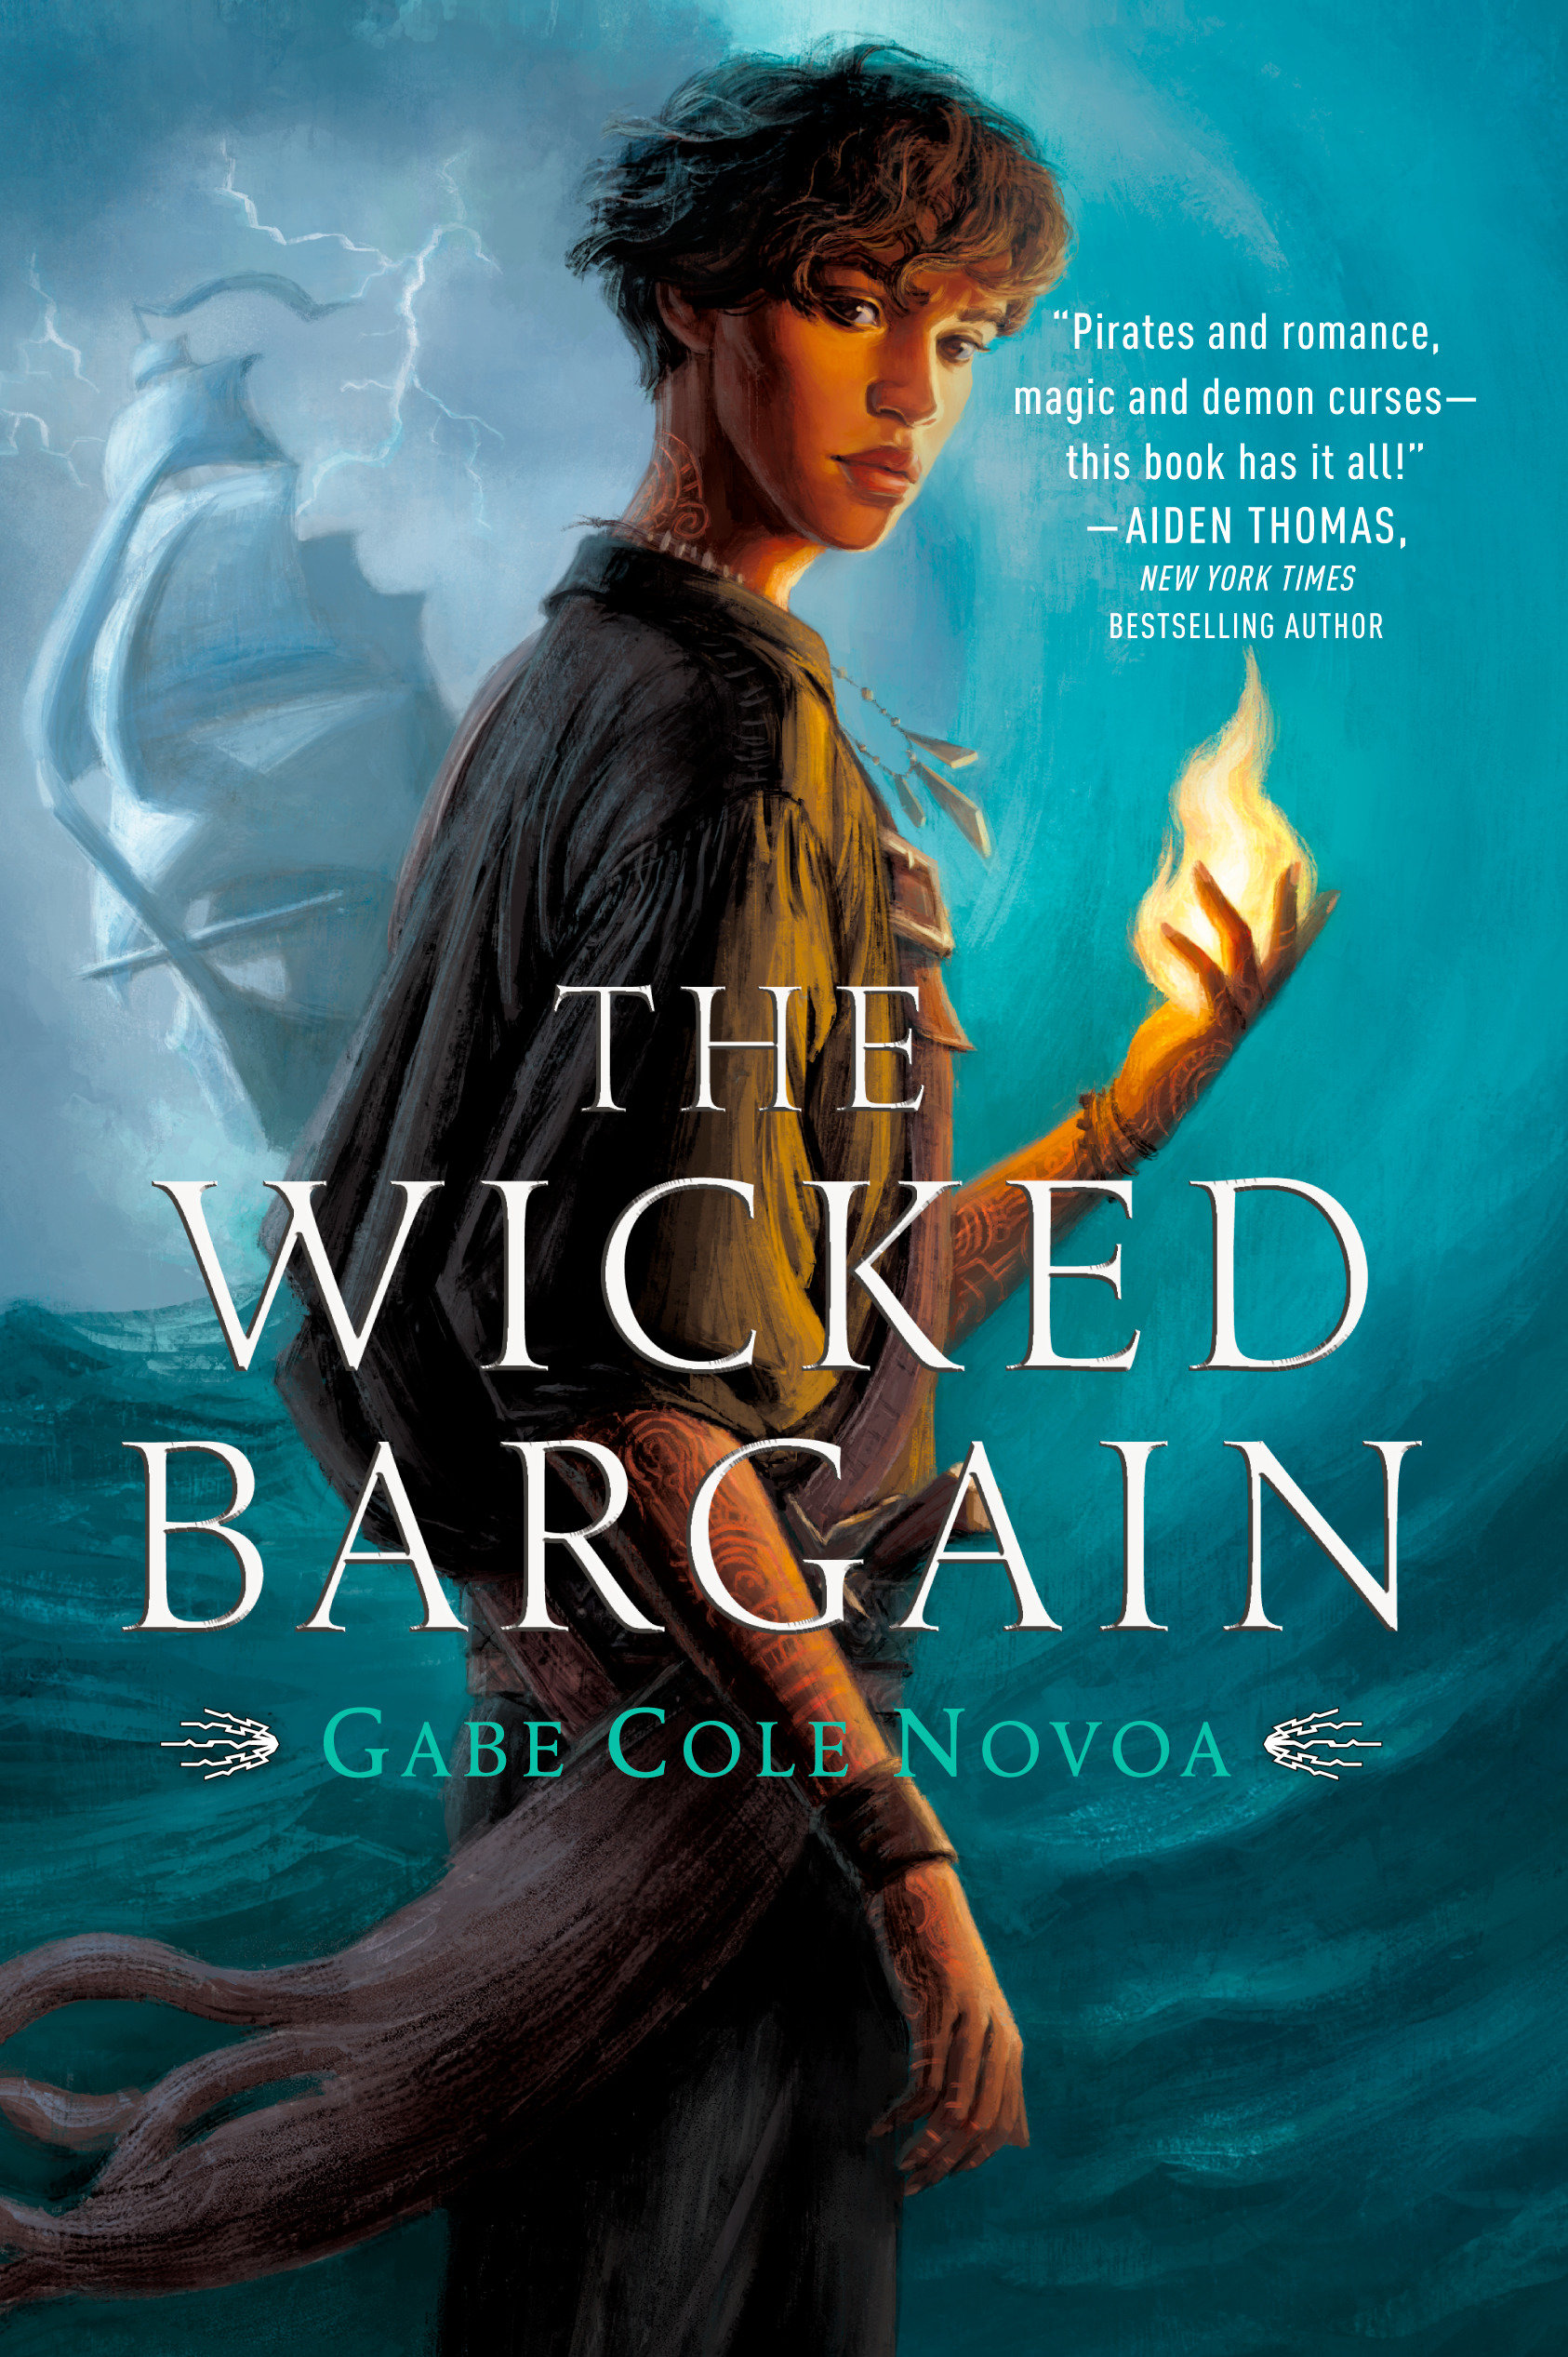 The Wicked Bargain (Hardcover Book)